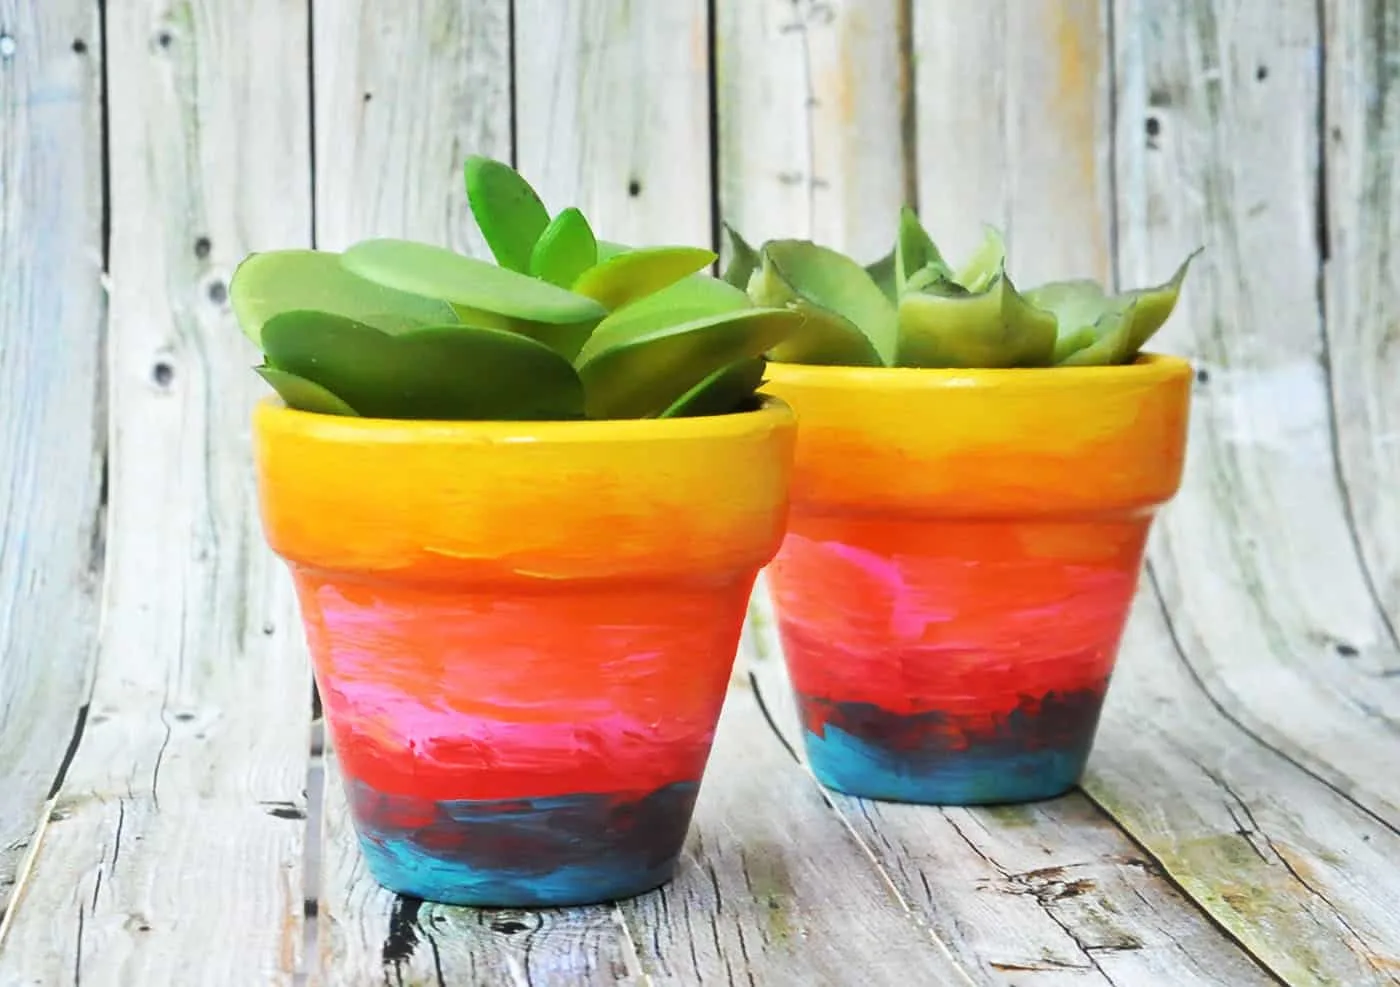 How to Paint Garden Pots and Planters